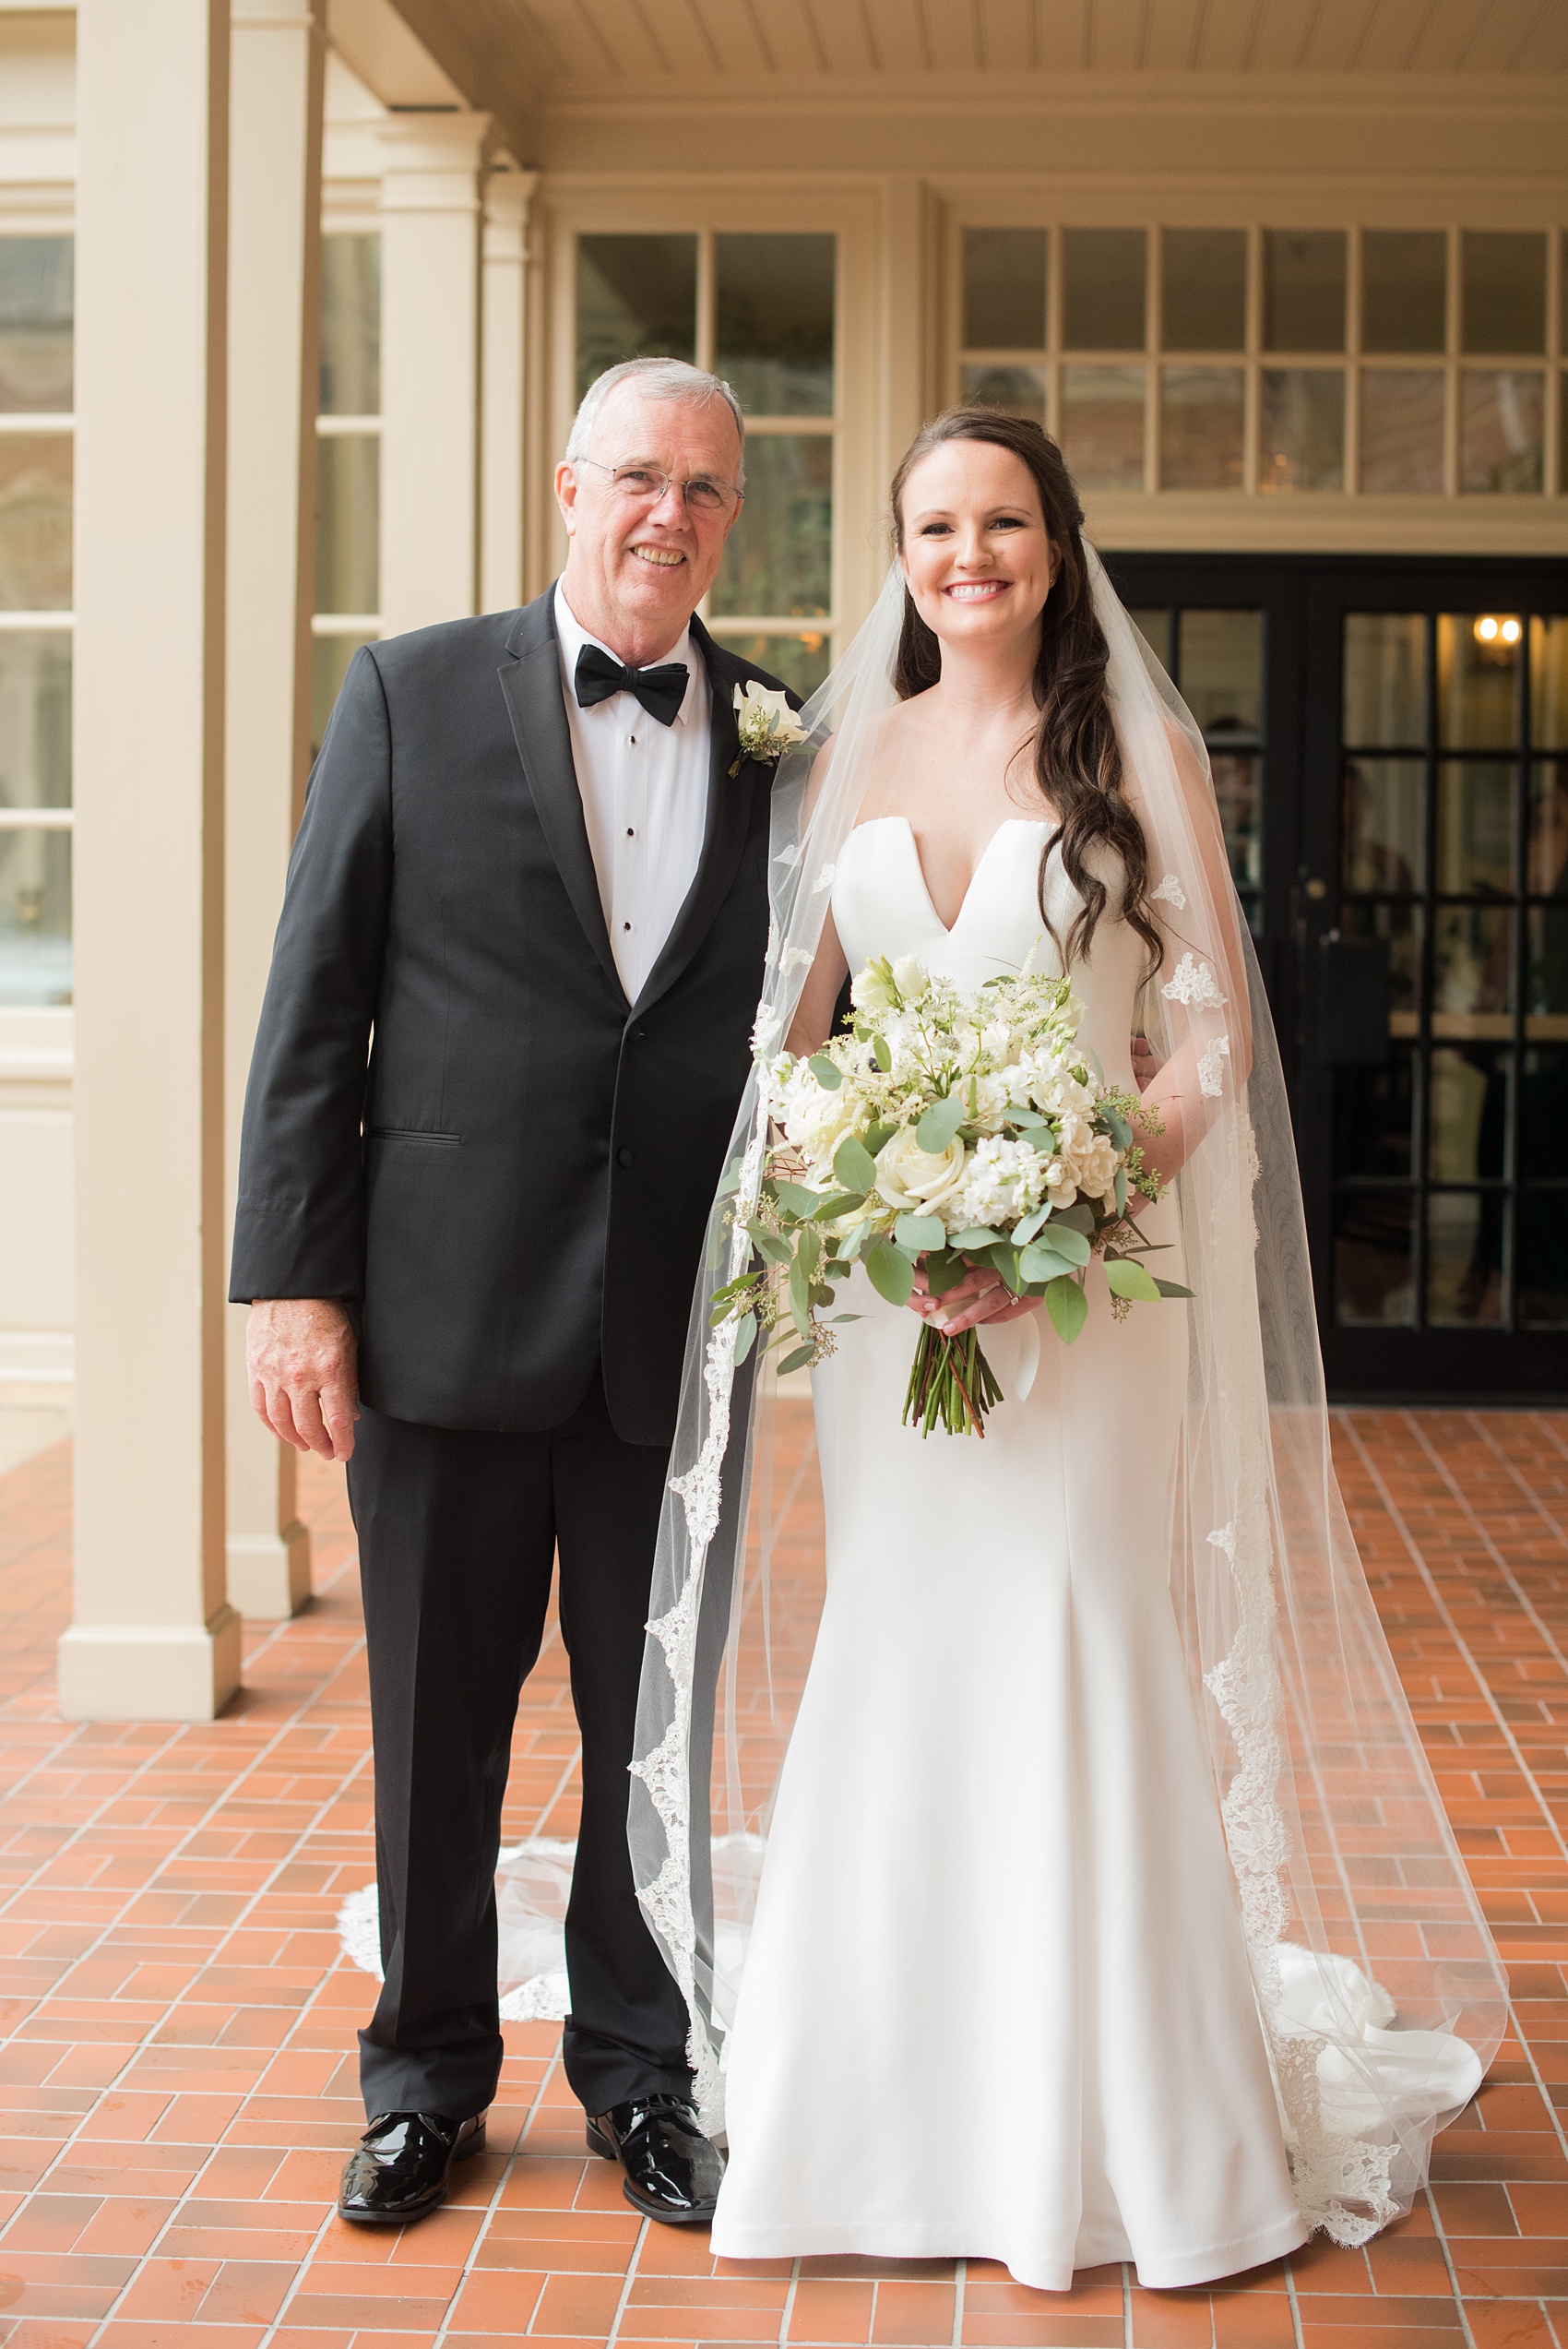 Photos of a fall wedding at The Carolina Inn, in Chapel Hill North Carolina, by Mikkel Paige Photography. This event venue doubles as a hotel for guests, who can enjoy a reception and ceremony indoors or outdoors. The bride’s father was shocked by his beautiful daughter, a bride wearing a simple elegant white gown and cathedral length veil. Click through to see inspiration from the entire wedding! Planner: @asouthernsoiree #thecarolinainn #ChapelHillWeddings #MikkelPaige #bride #fatherofthebride